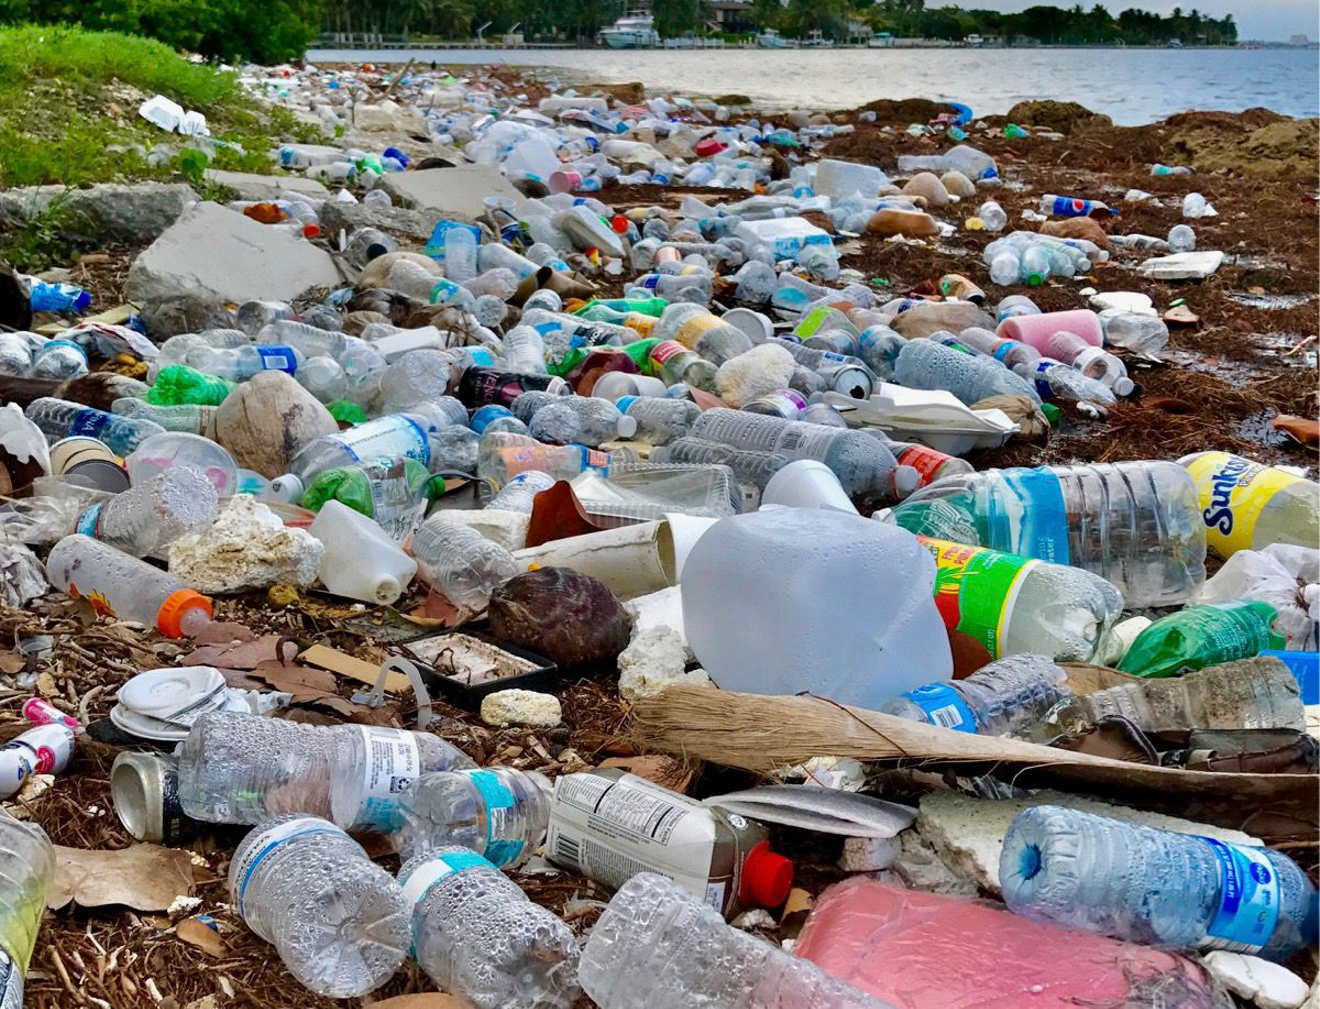 You might just as well call this an artist's conception of Miamians' recycling practices.